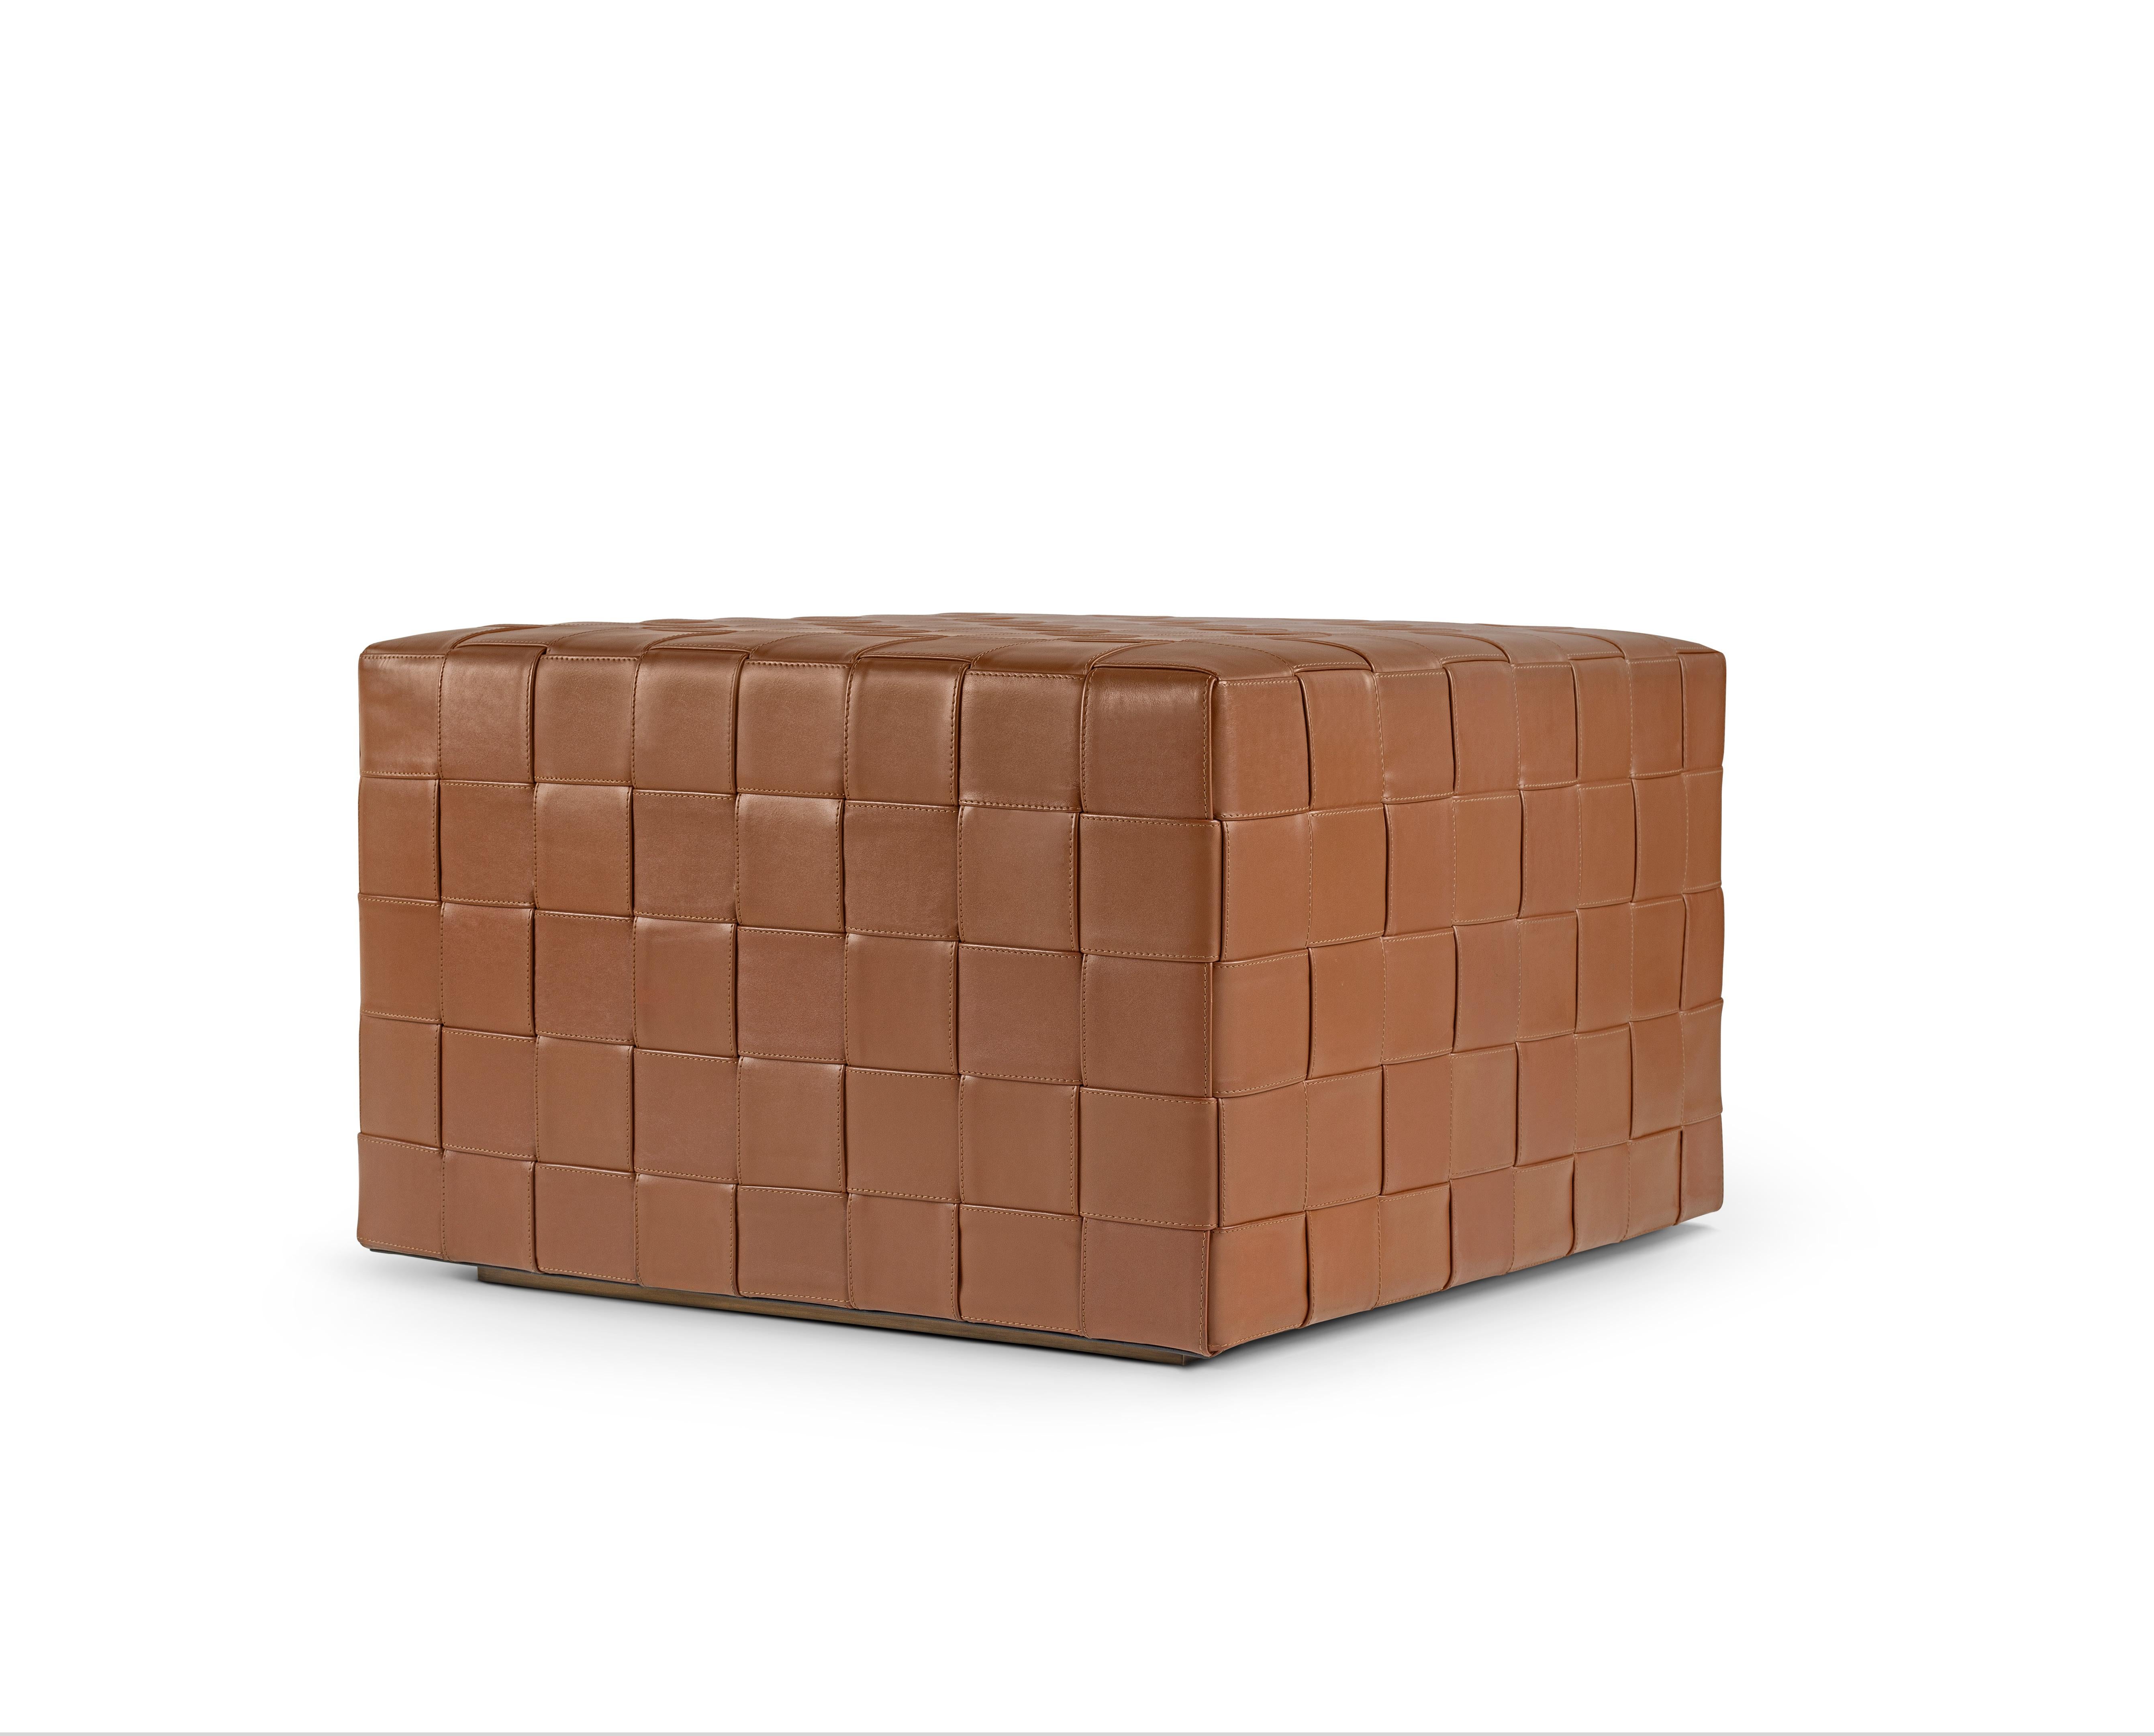 Arizona pouf by Madheke
Dimensions: D 61.5 x W 61.5 x H 41 cm
Materials: Leather, wood.

Classic soft leather weave with stitched edge detail and brass base.

Reflecting the finest in craftsmanship, innovation and heritage, Madheke creates tailored